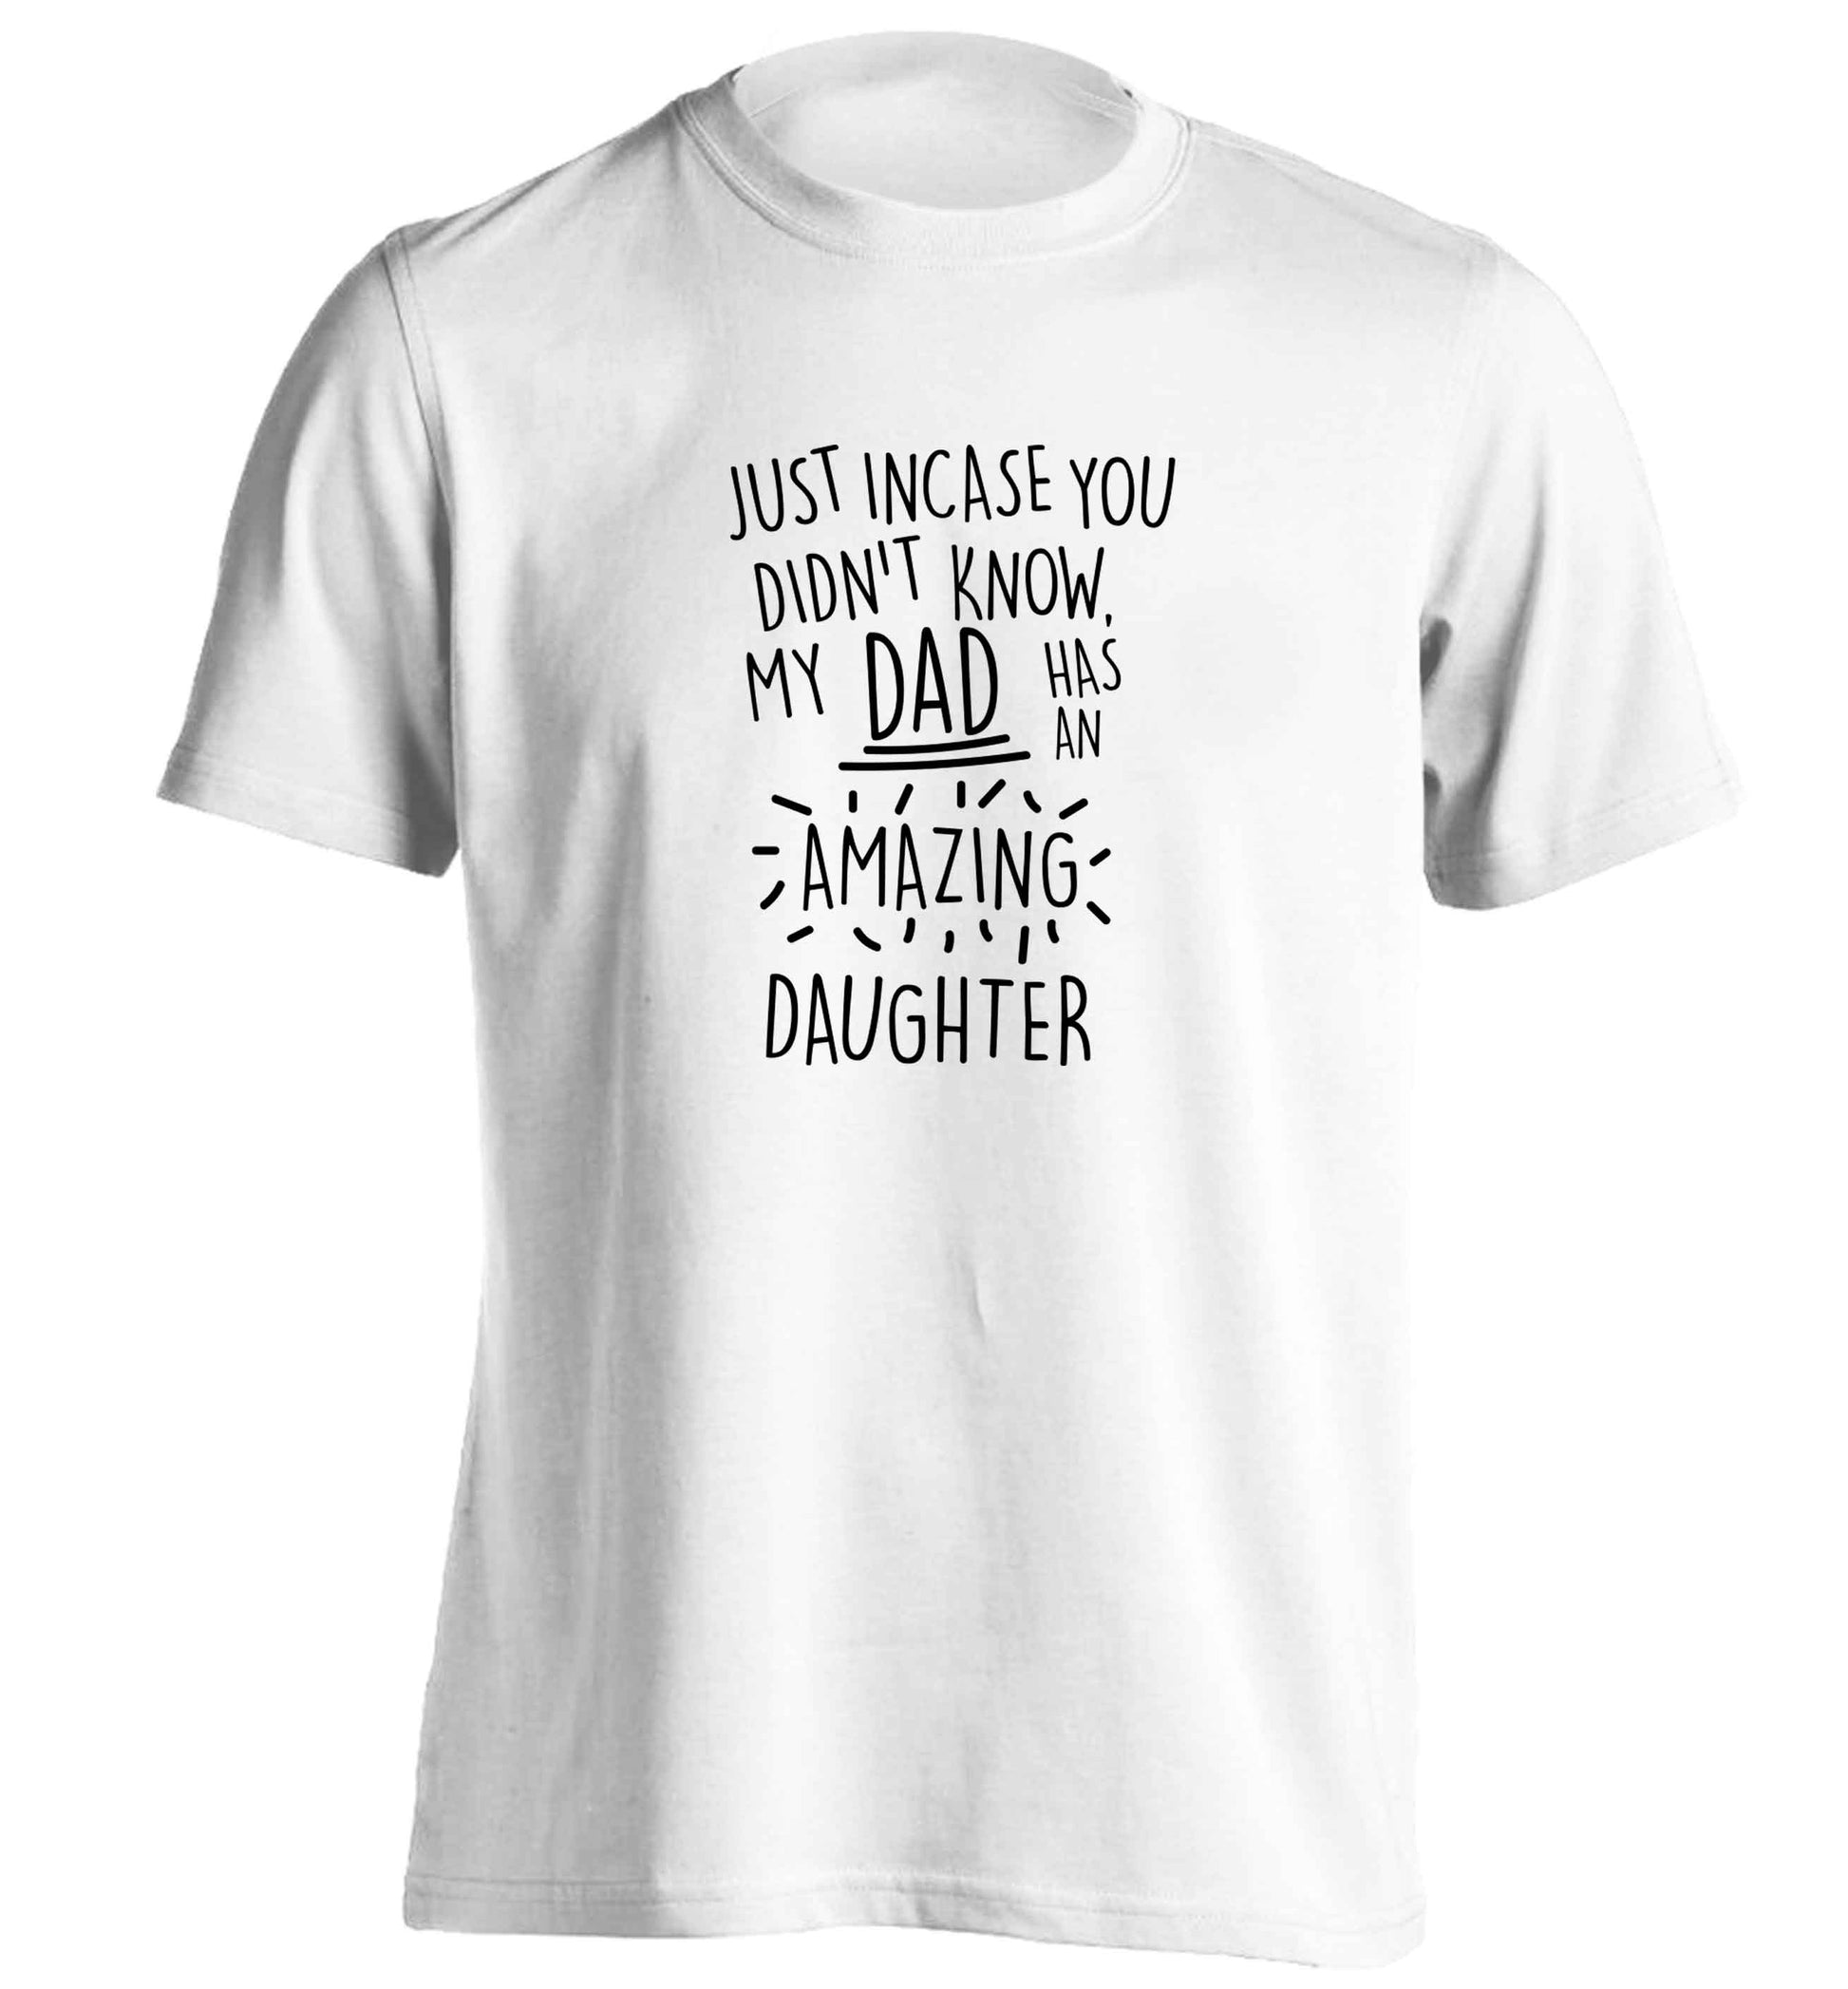 Just incase you didn't know my dad has an amazing daughter adults unisex white Tshirt 2XL